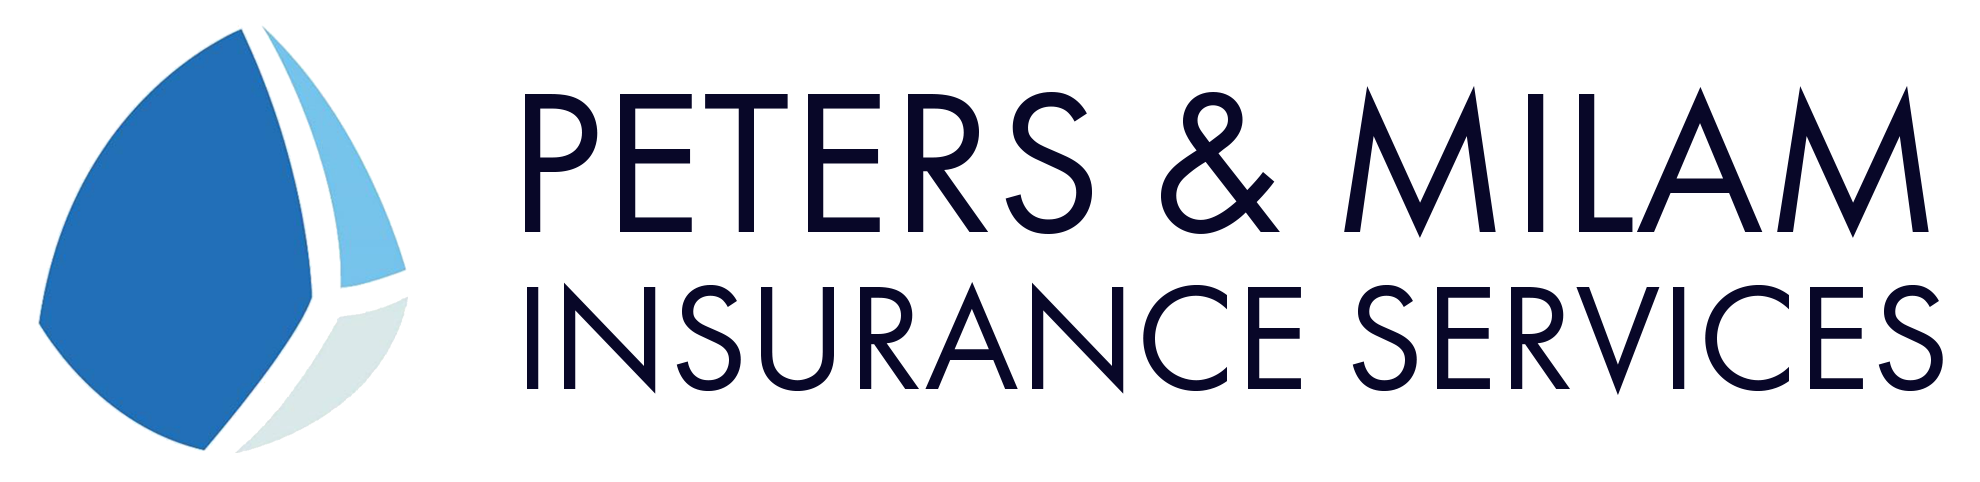 Peters &amp; Milam Insurance Services